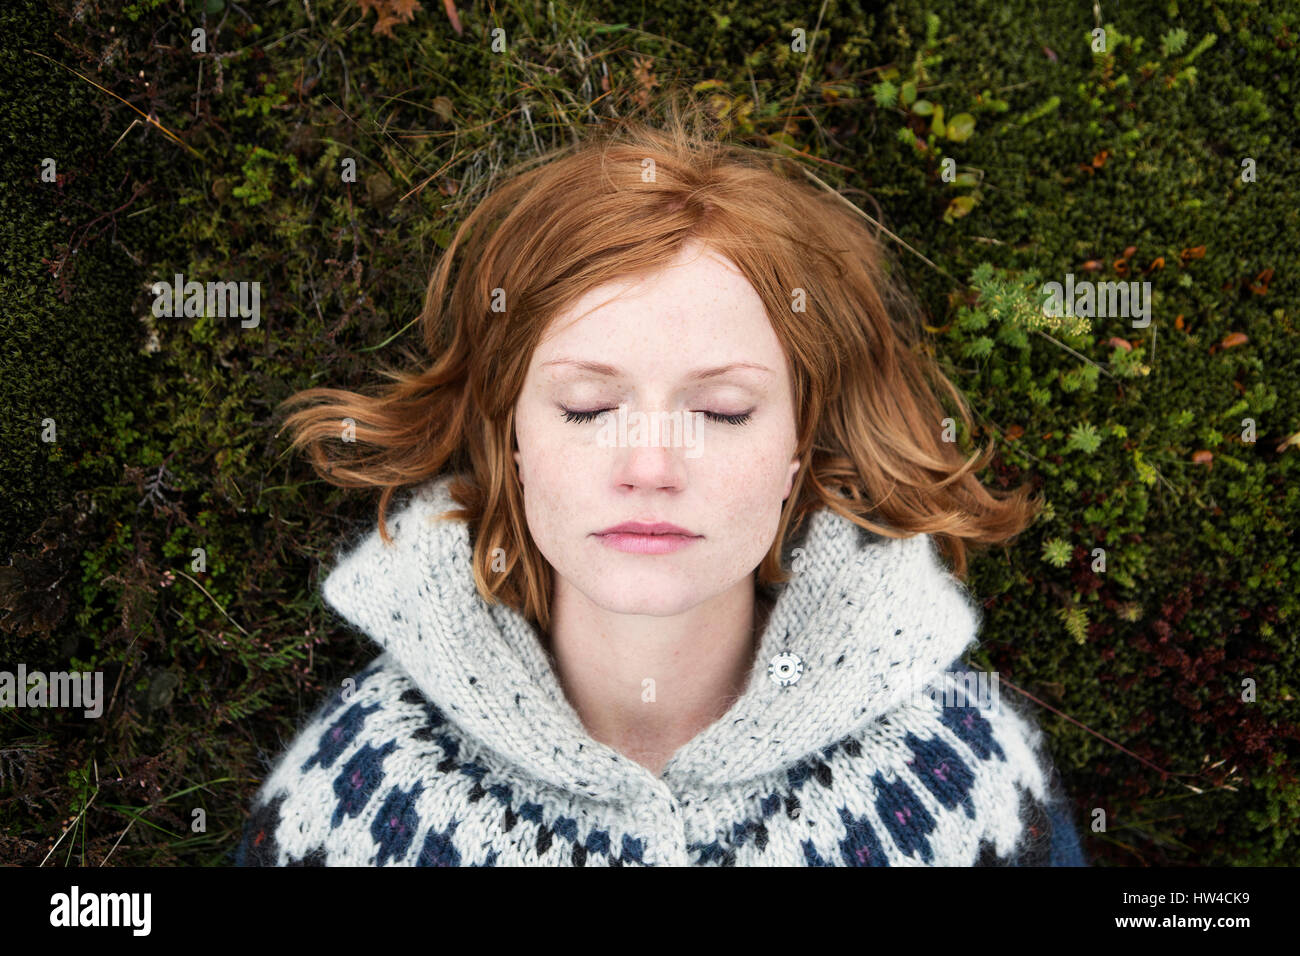 Caucasian woman laying on moss with eyes closed Stock Photo